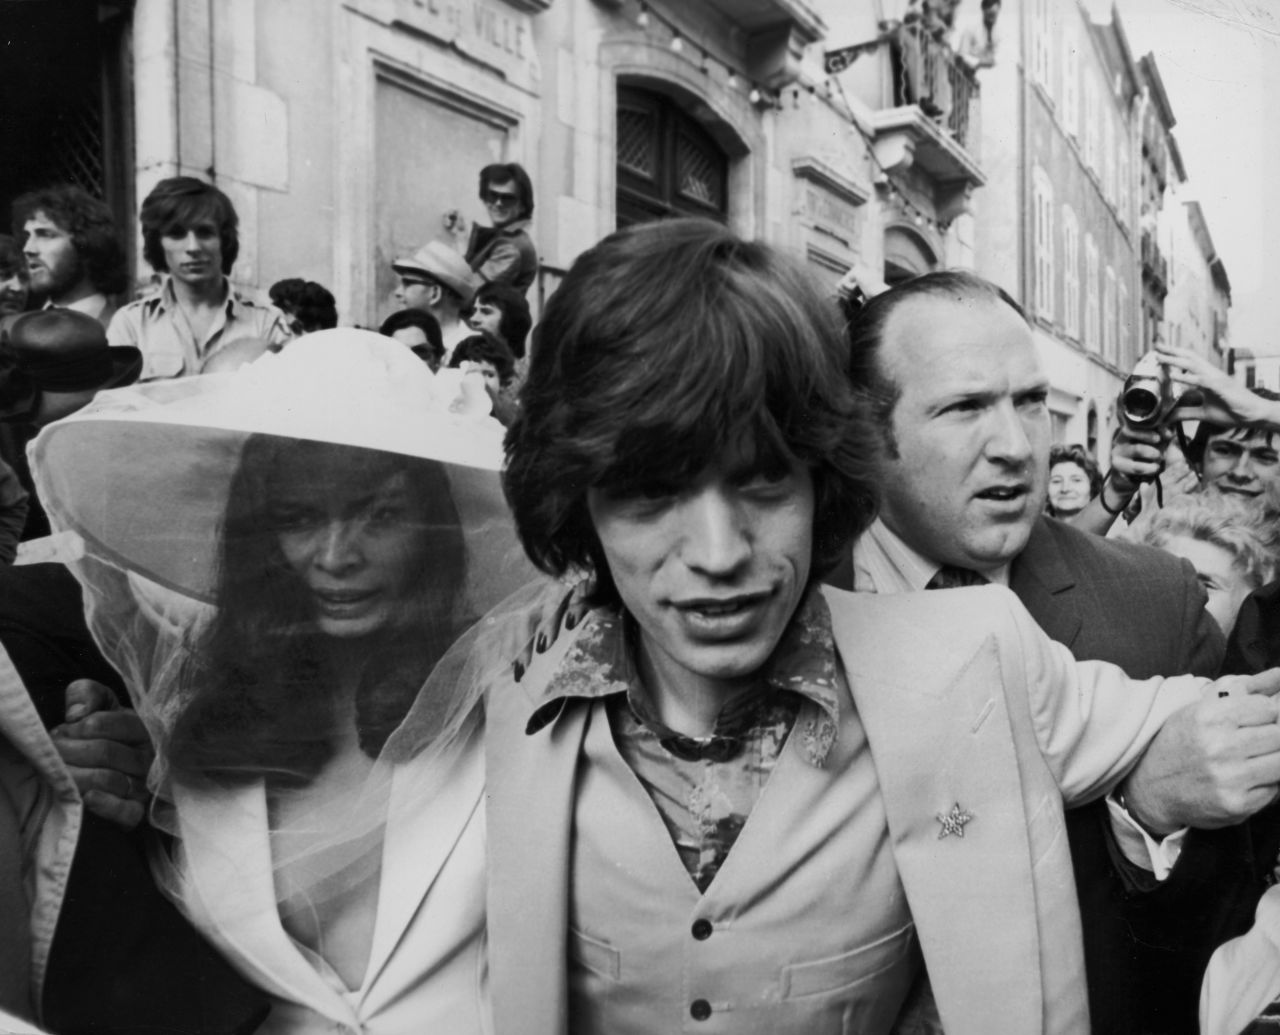 Five decades of Mick Jagger and the Rolling Stones | CNN